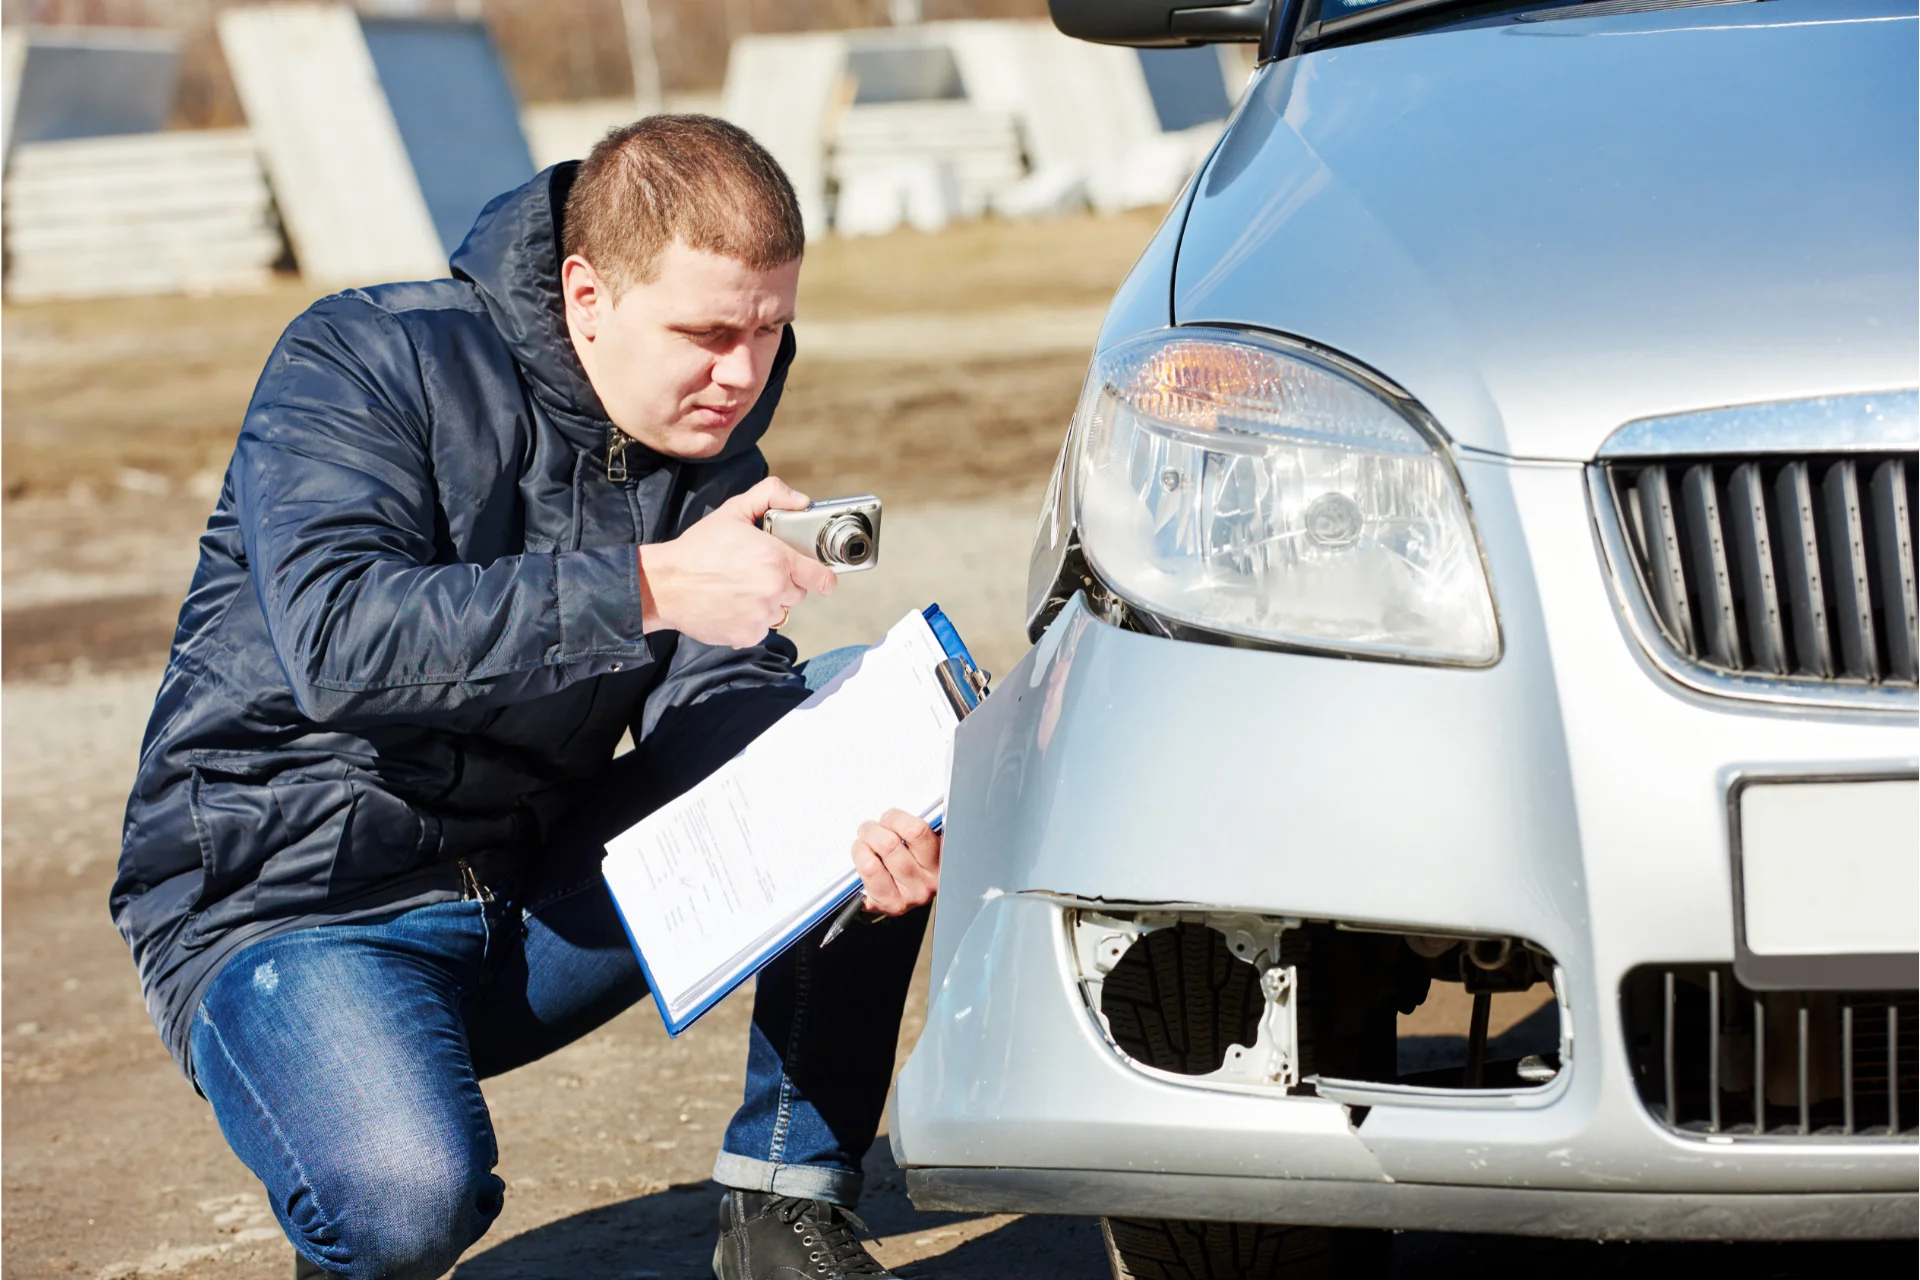 Insurance agent inspecting car damage after accident